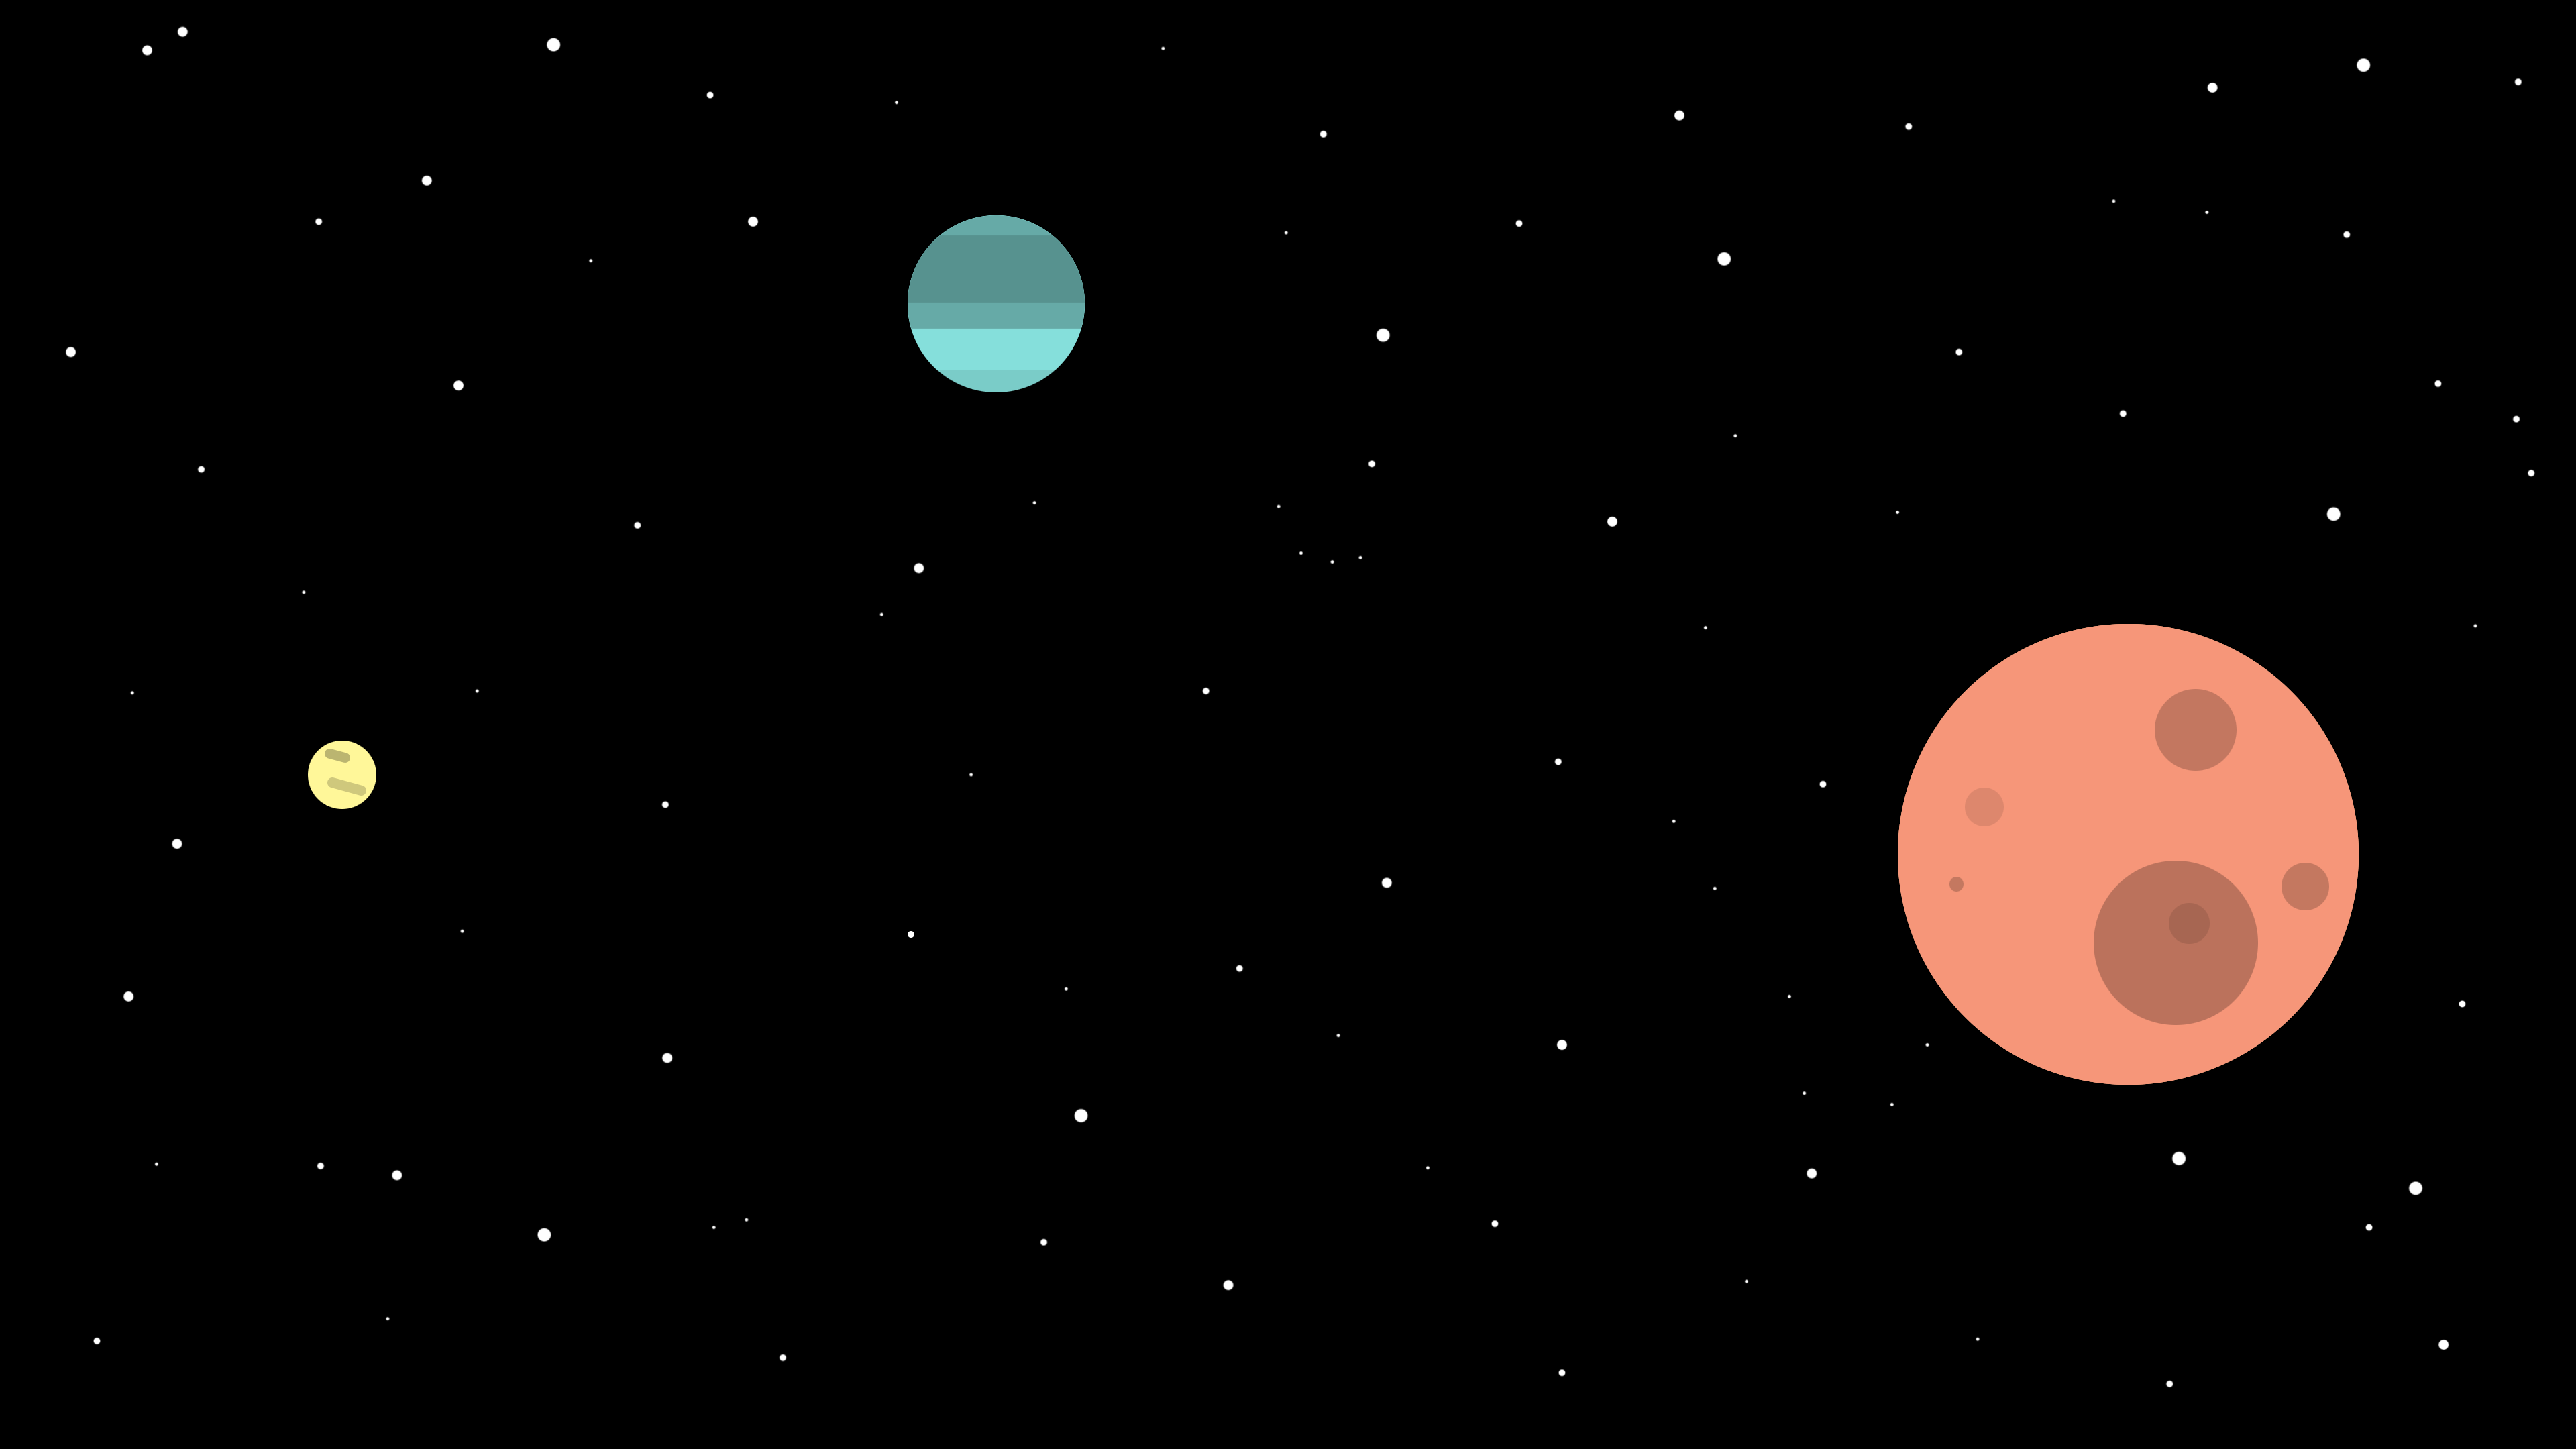 Simple space wallpaper I made (3840x2160)